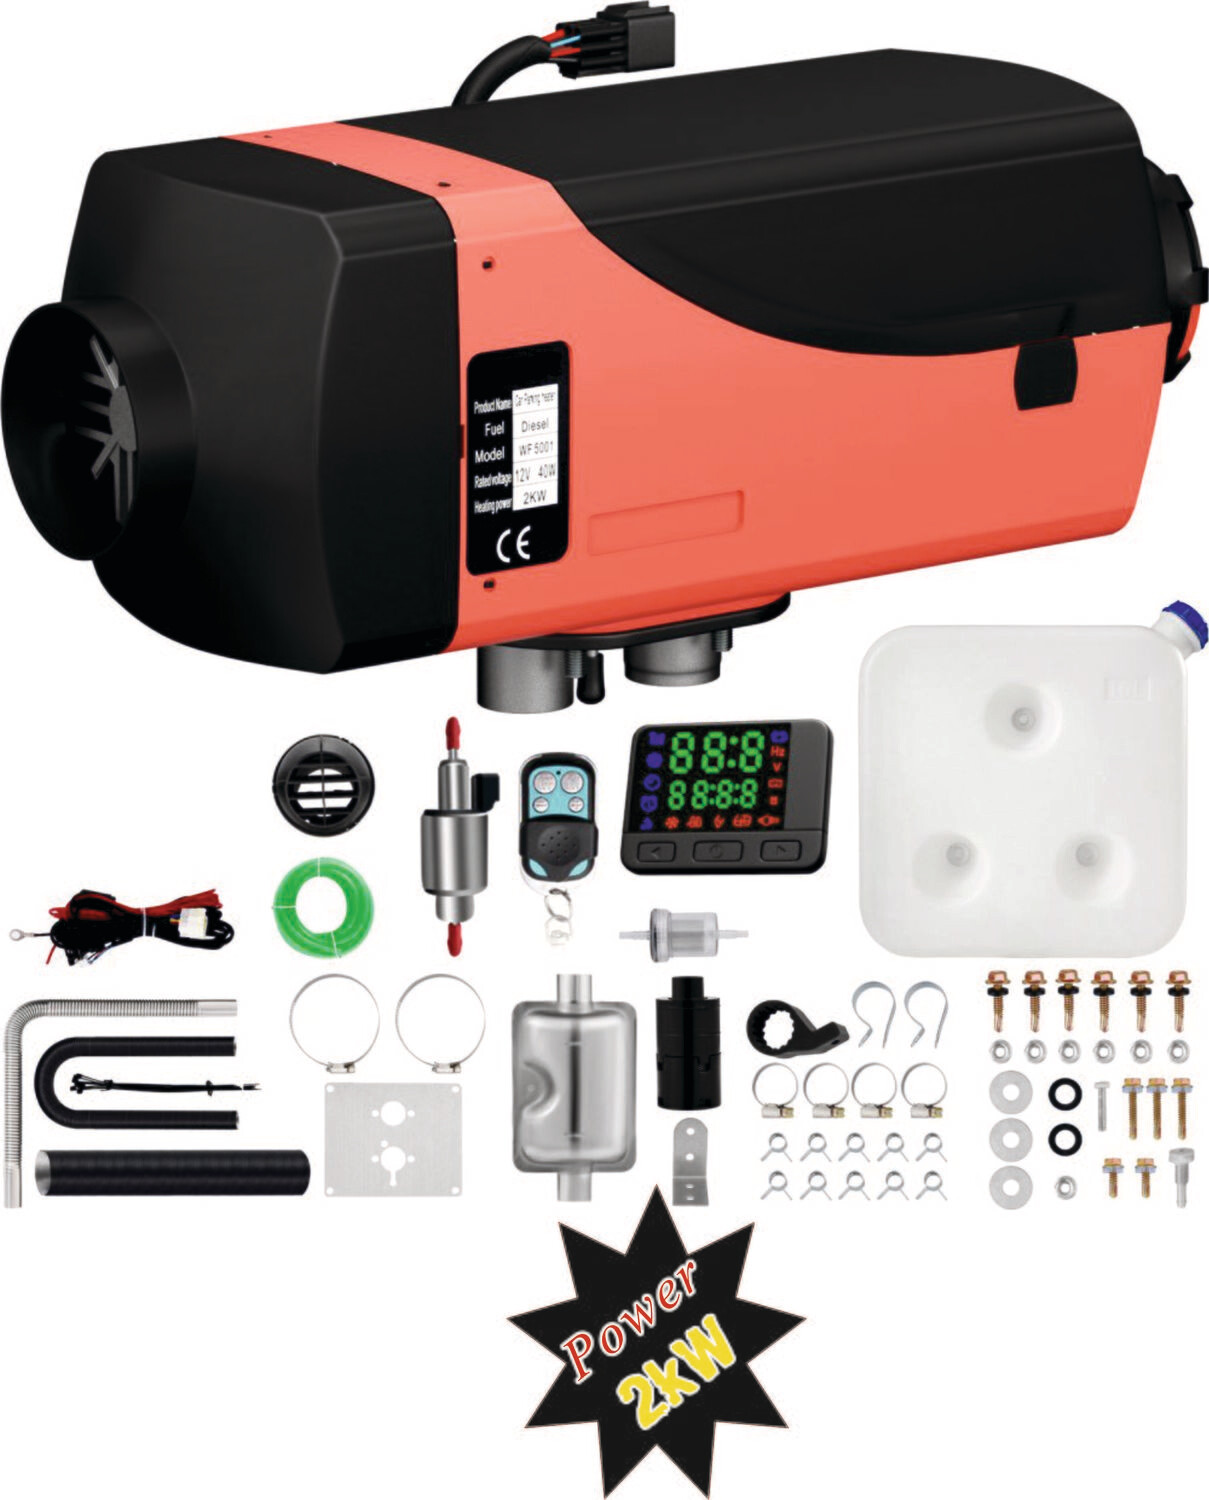 2/3/5/8KW 12V Diesel Air Heater Parking Heater with Silencer, LCD, and Remote Control